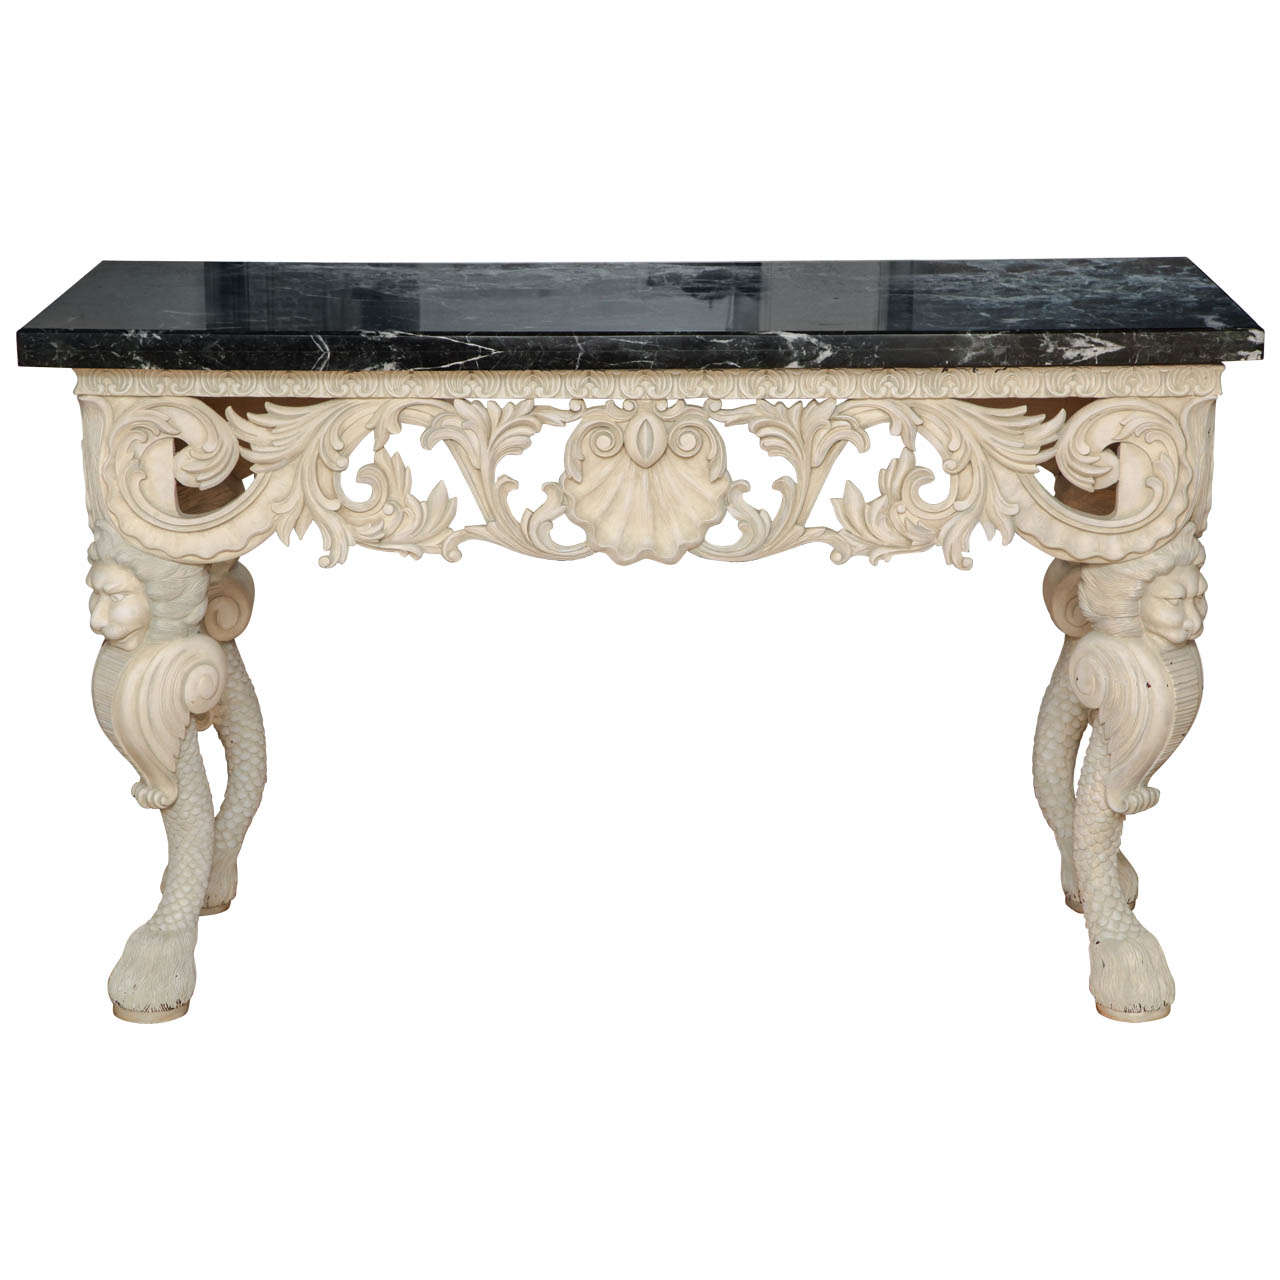 A George II Style Carved and Painted Console Table with Black Marble Top, c. 1940 For Sale